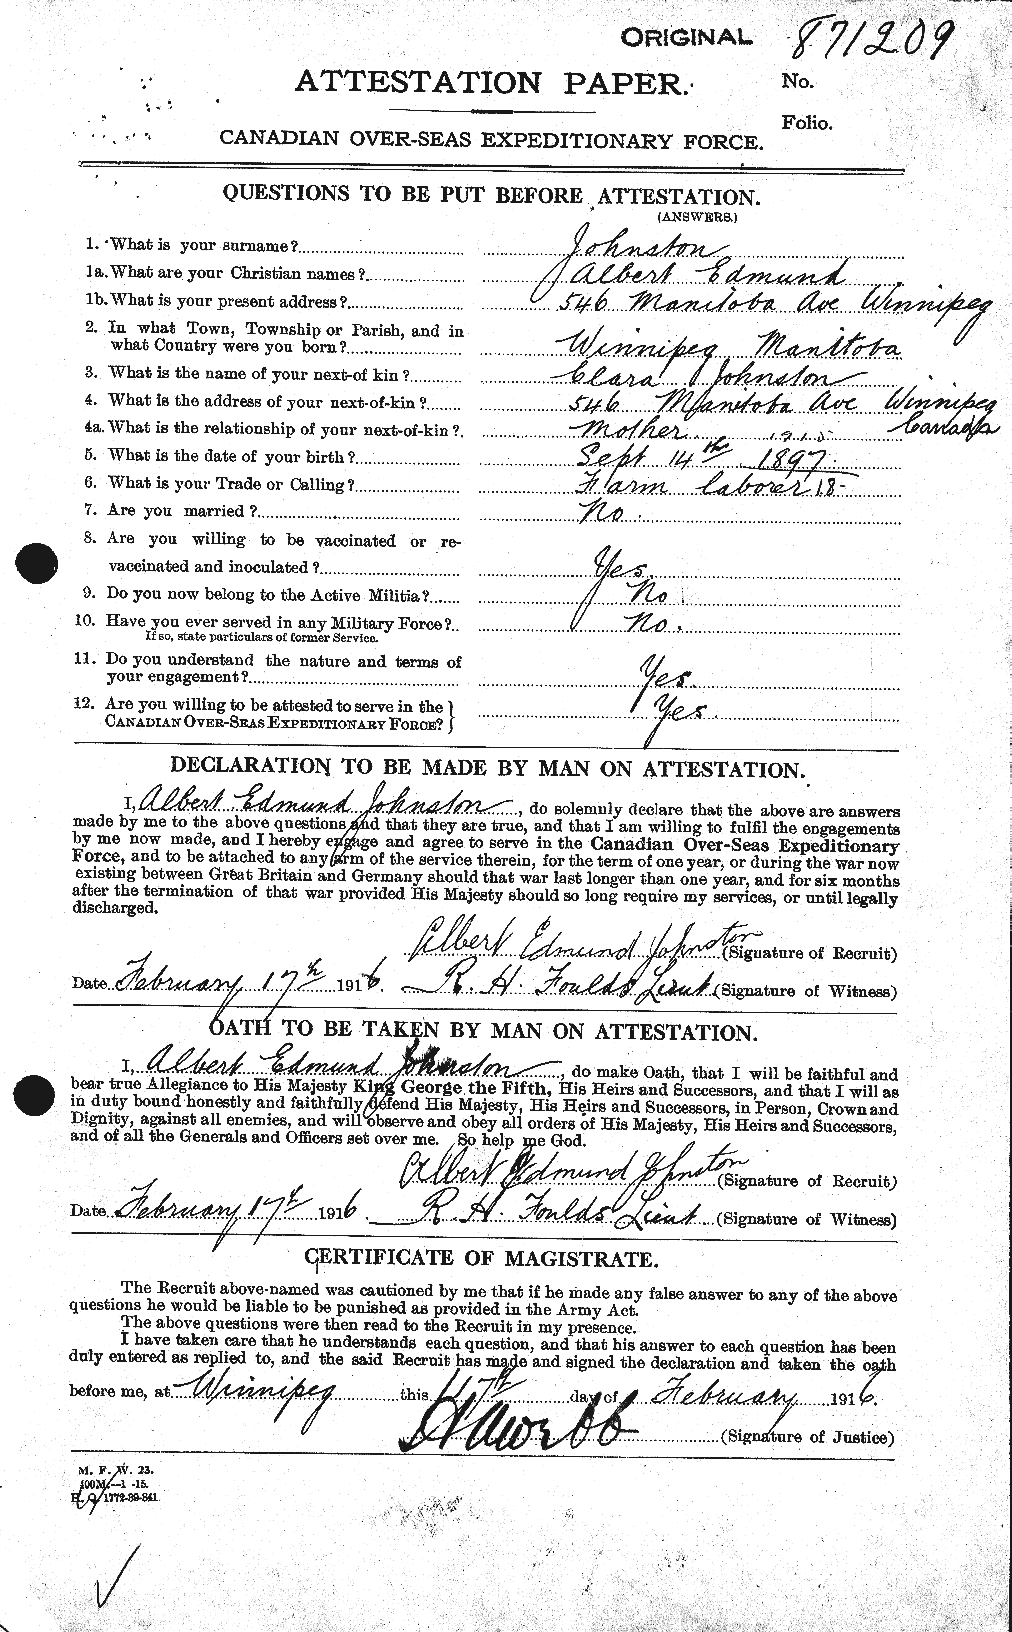 Personnel Records of the First World War - CEF 420939a